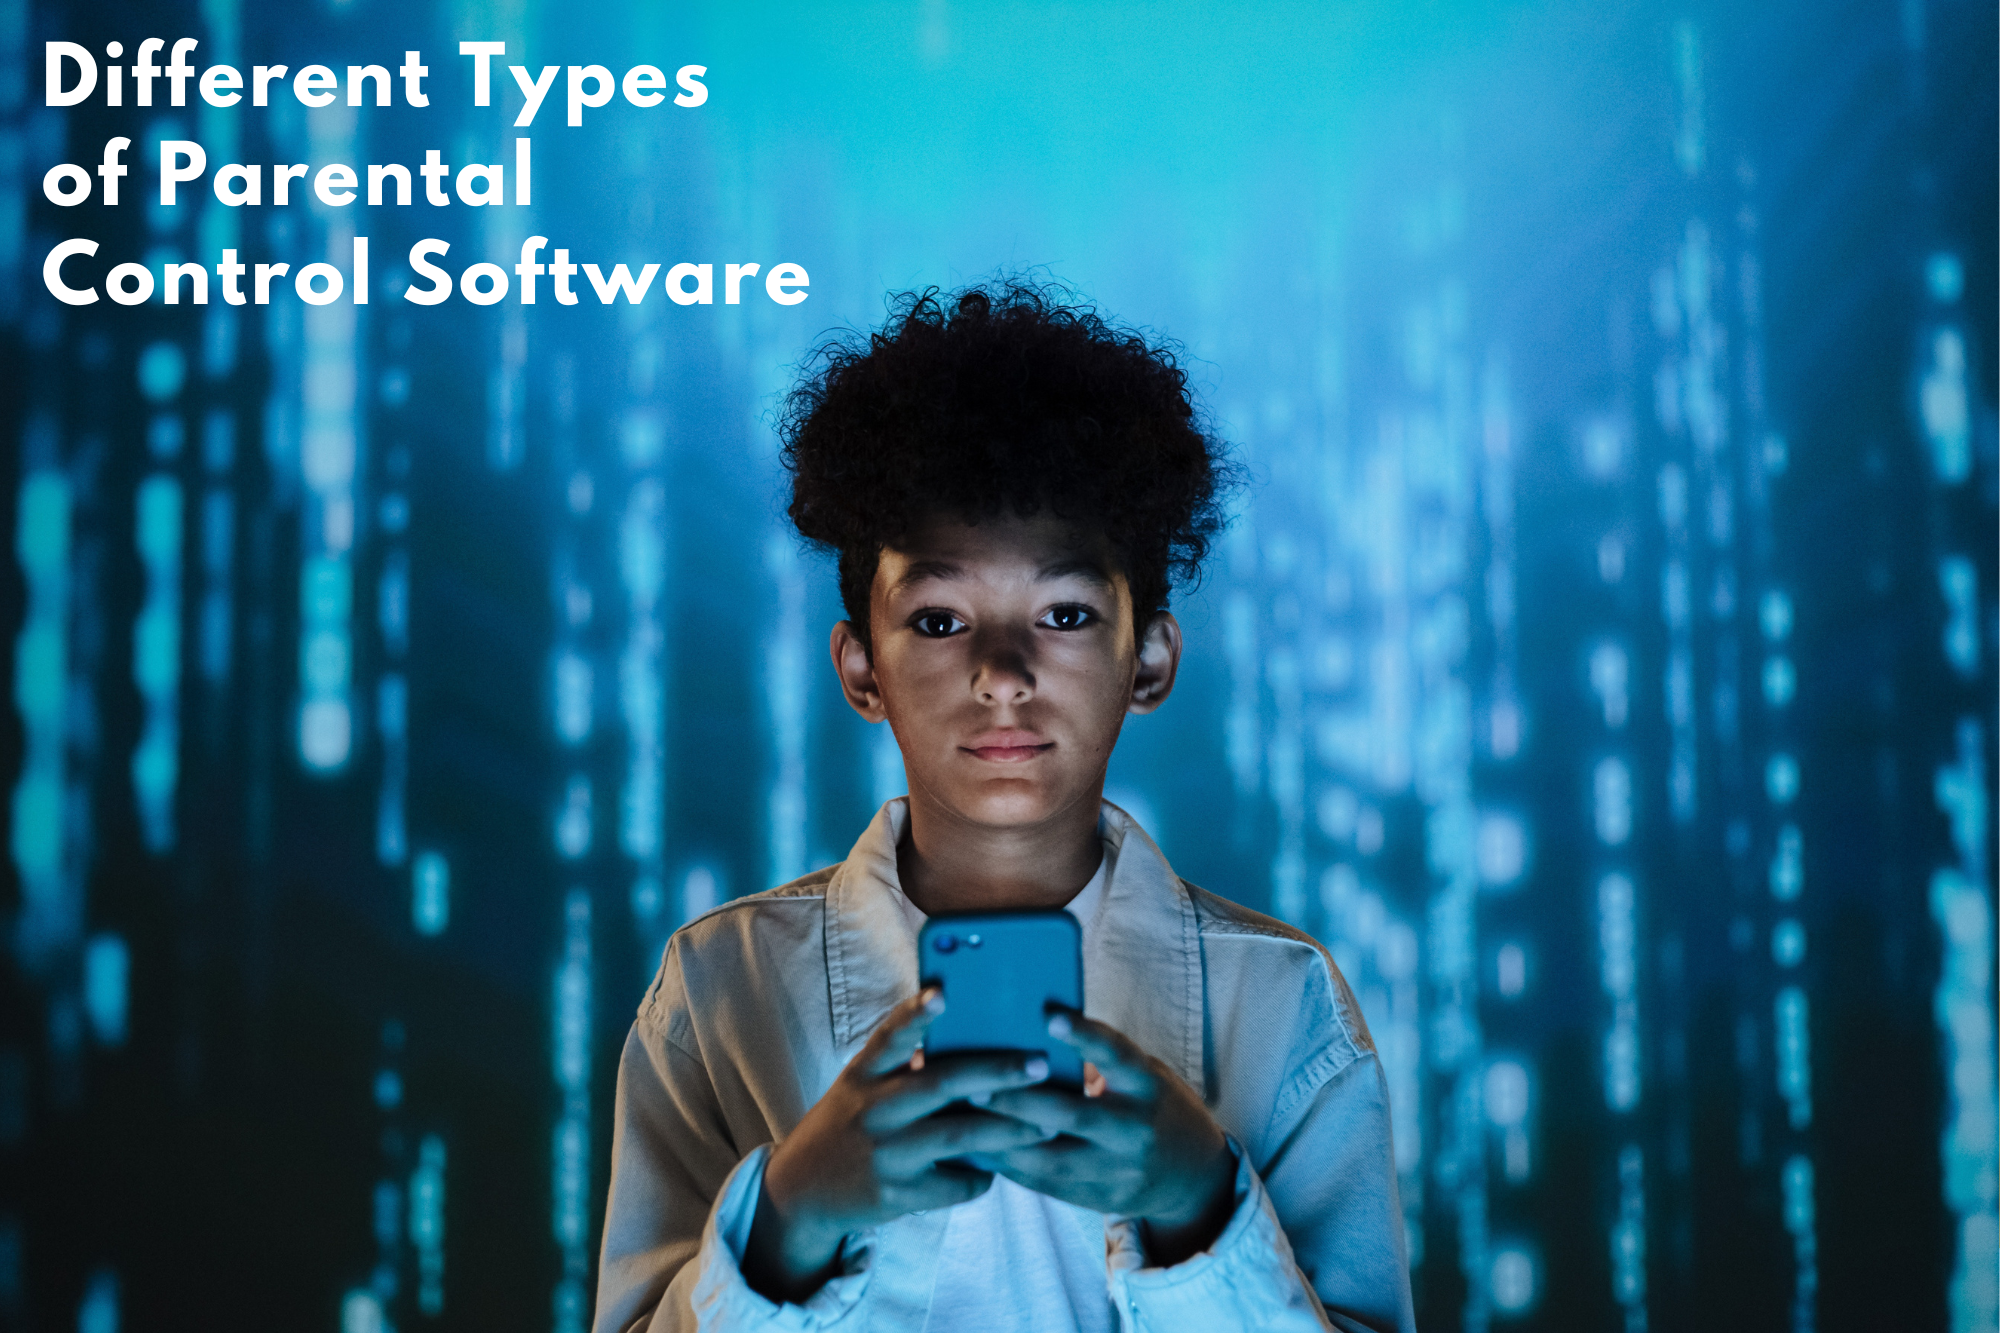 Understanding the Different Types of Parental Control Software